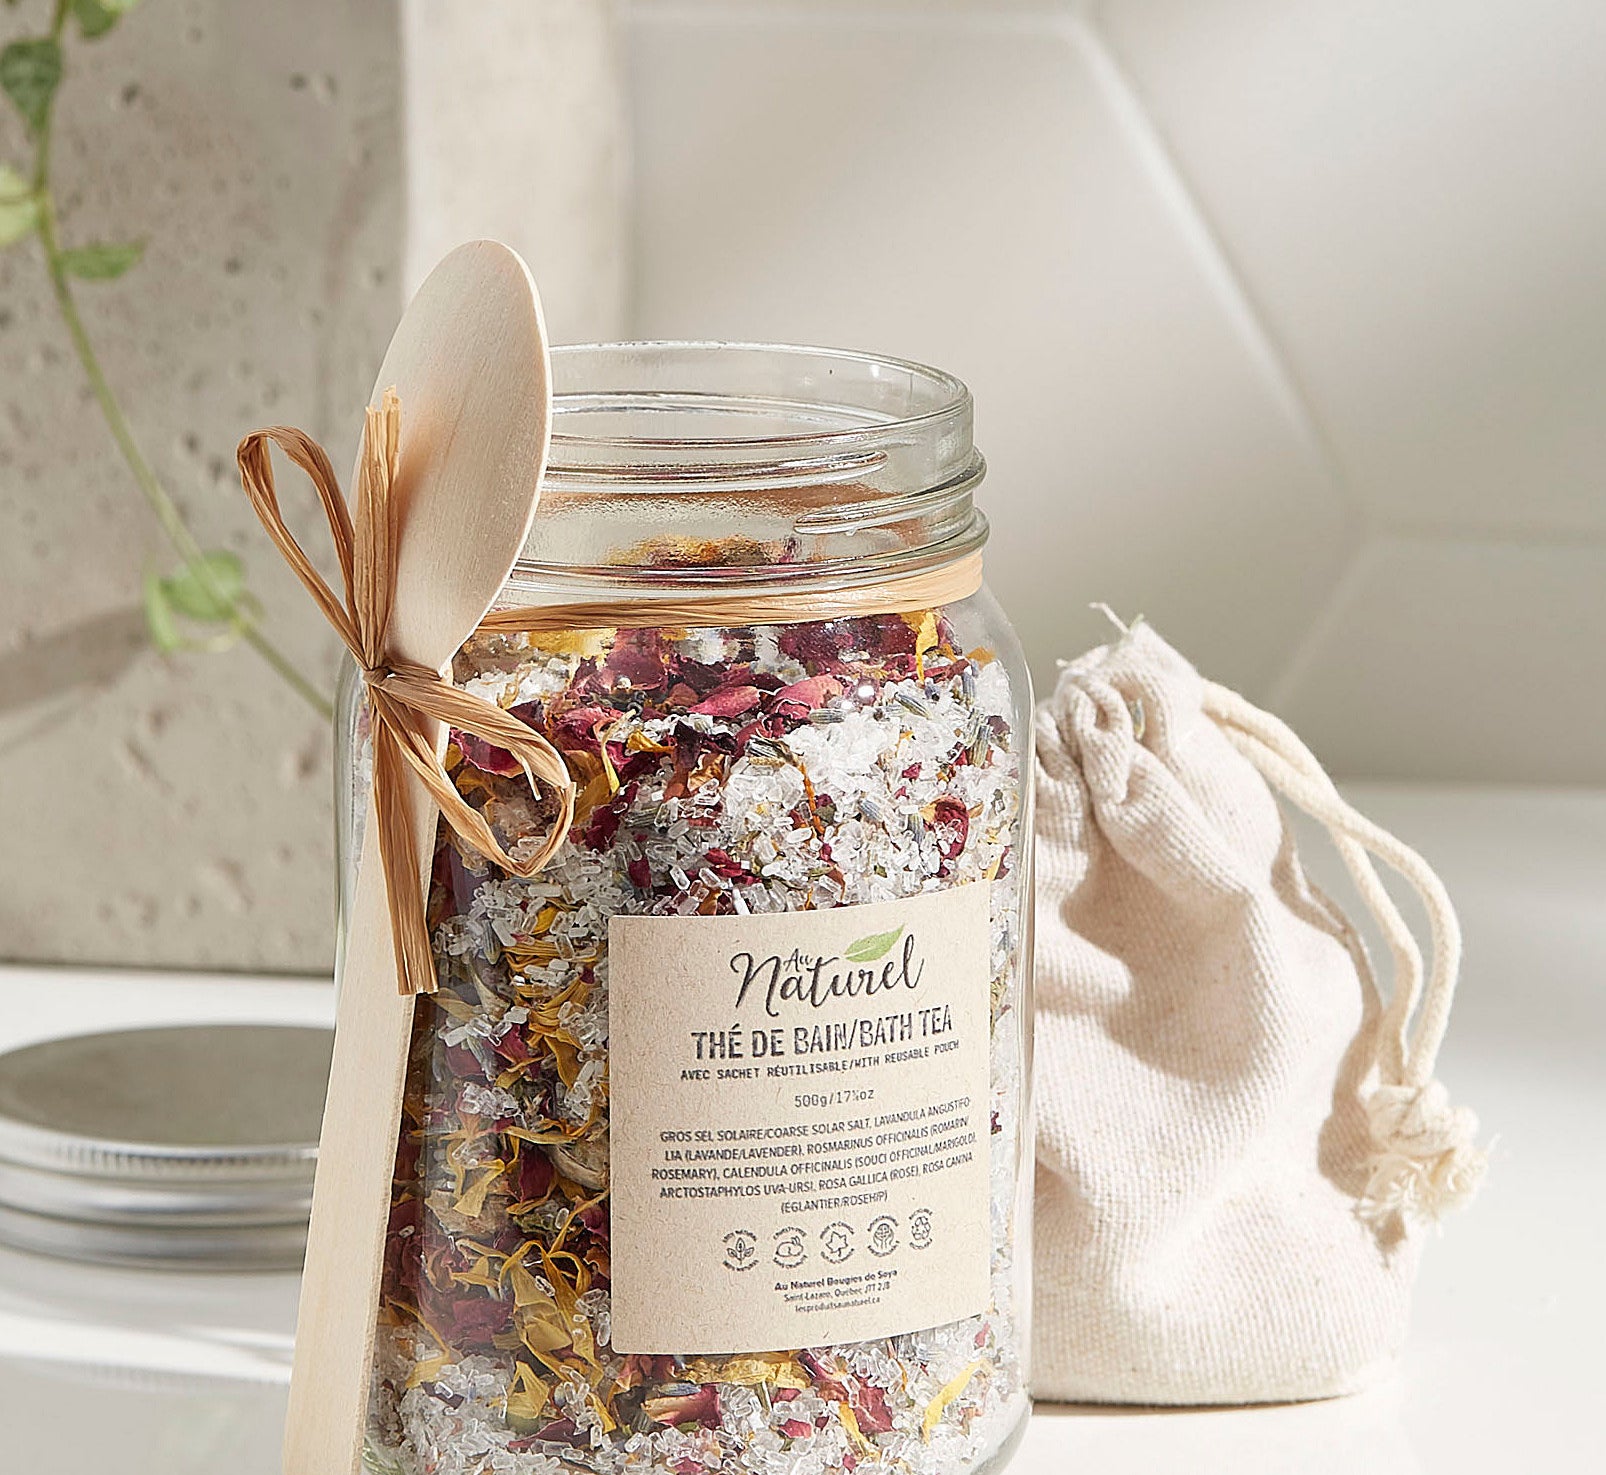 A large glass jar filled with bath salts